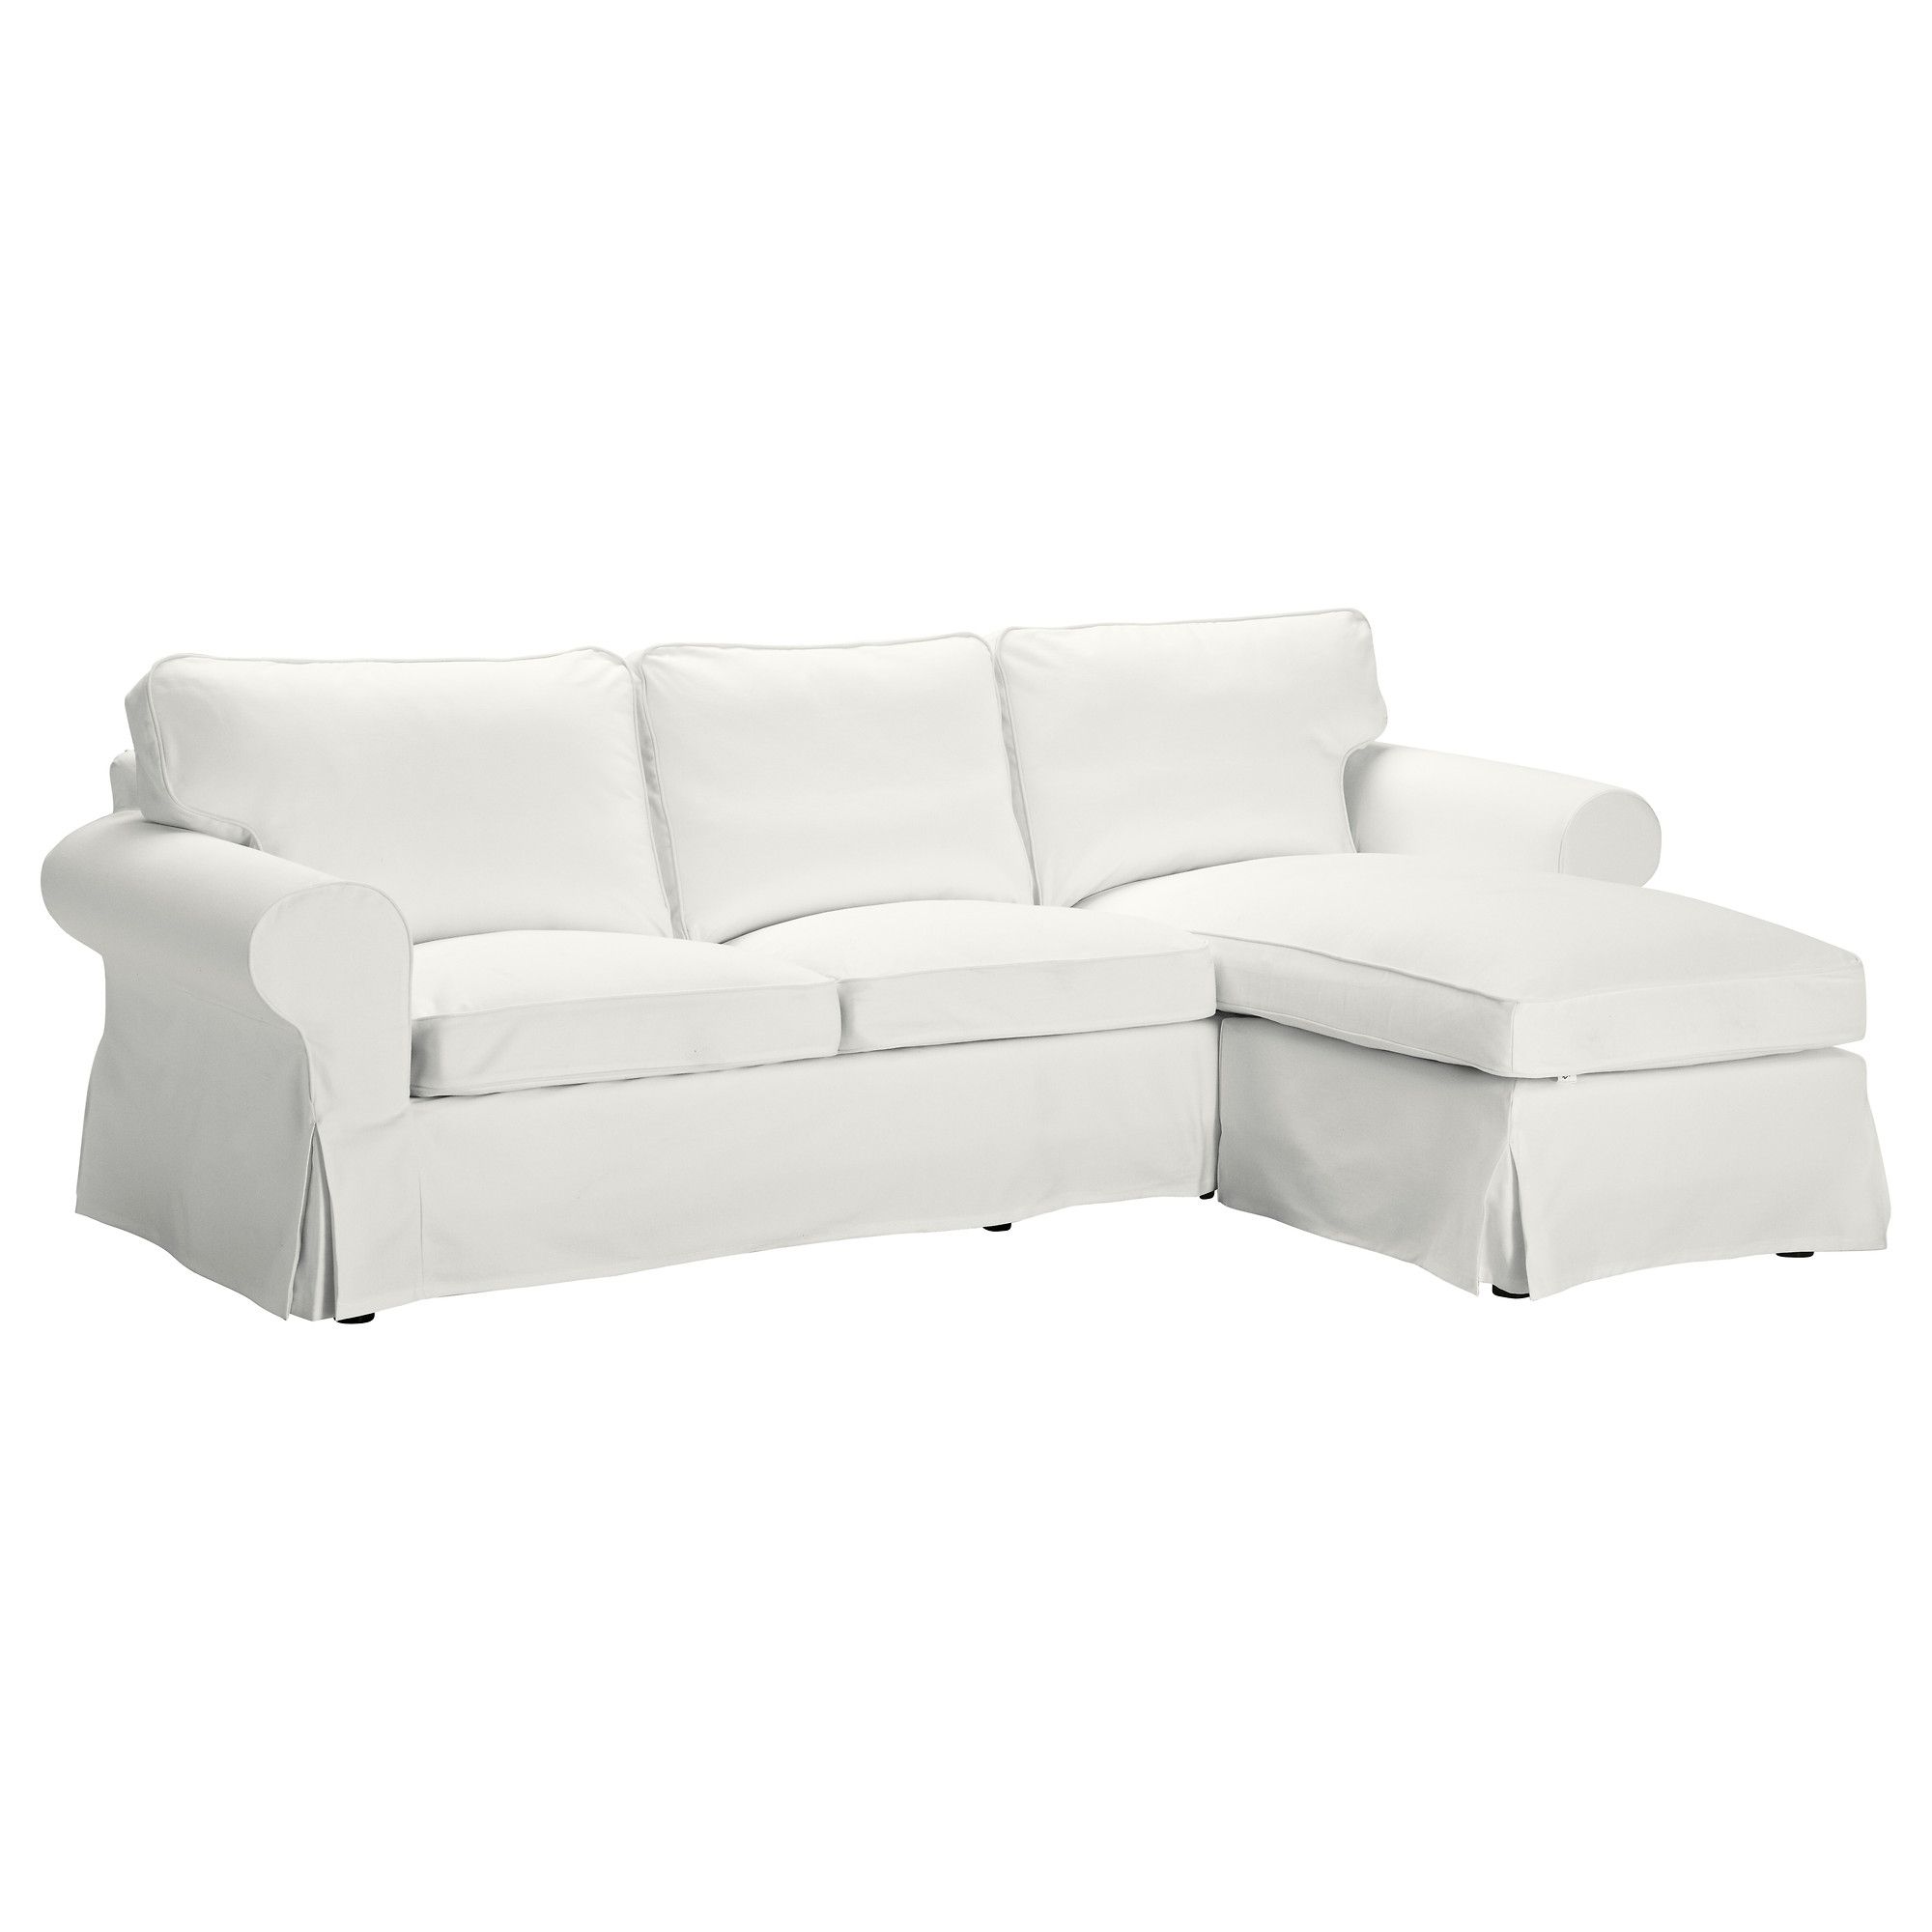 Ektorp Cover For 3 Seat Sofa With Chaise Longue/blekinge White – Ikea In Current Ikea Chaise Sofas (Photo 13 of 15)